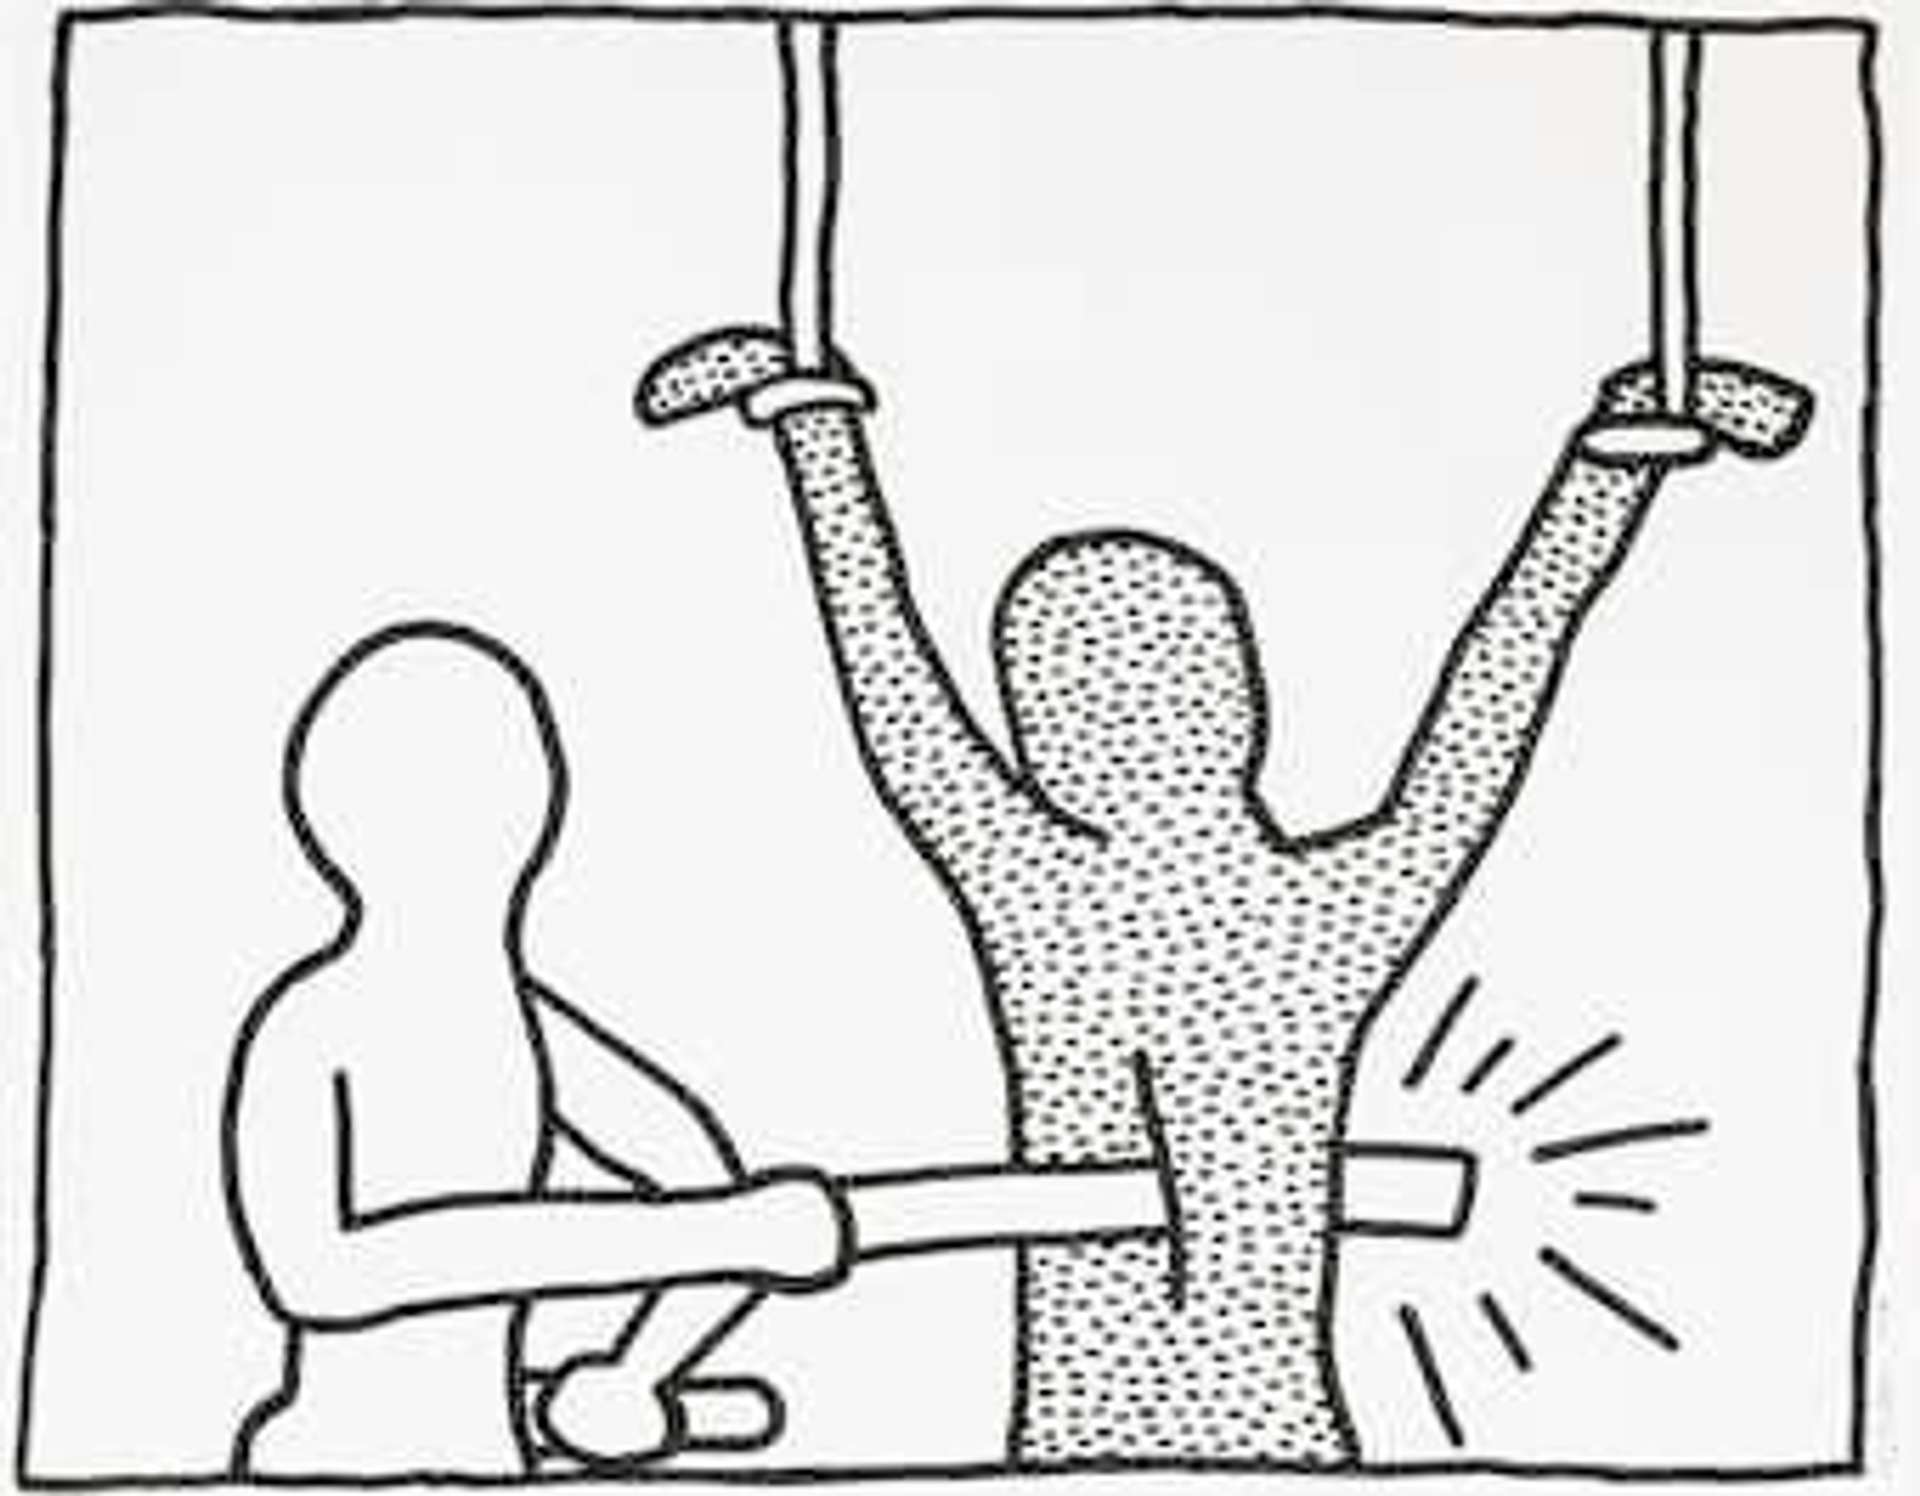 Keith Haring’s The Blueprint Drawings 7. A Pop Art screenprint of a black and white comic strip of a figure being stabbed in the abdomen.